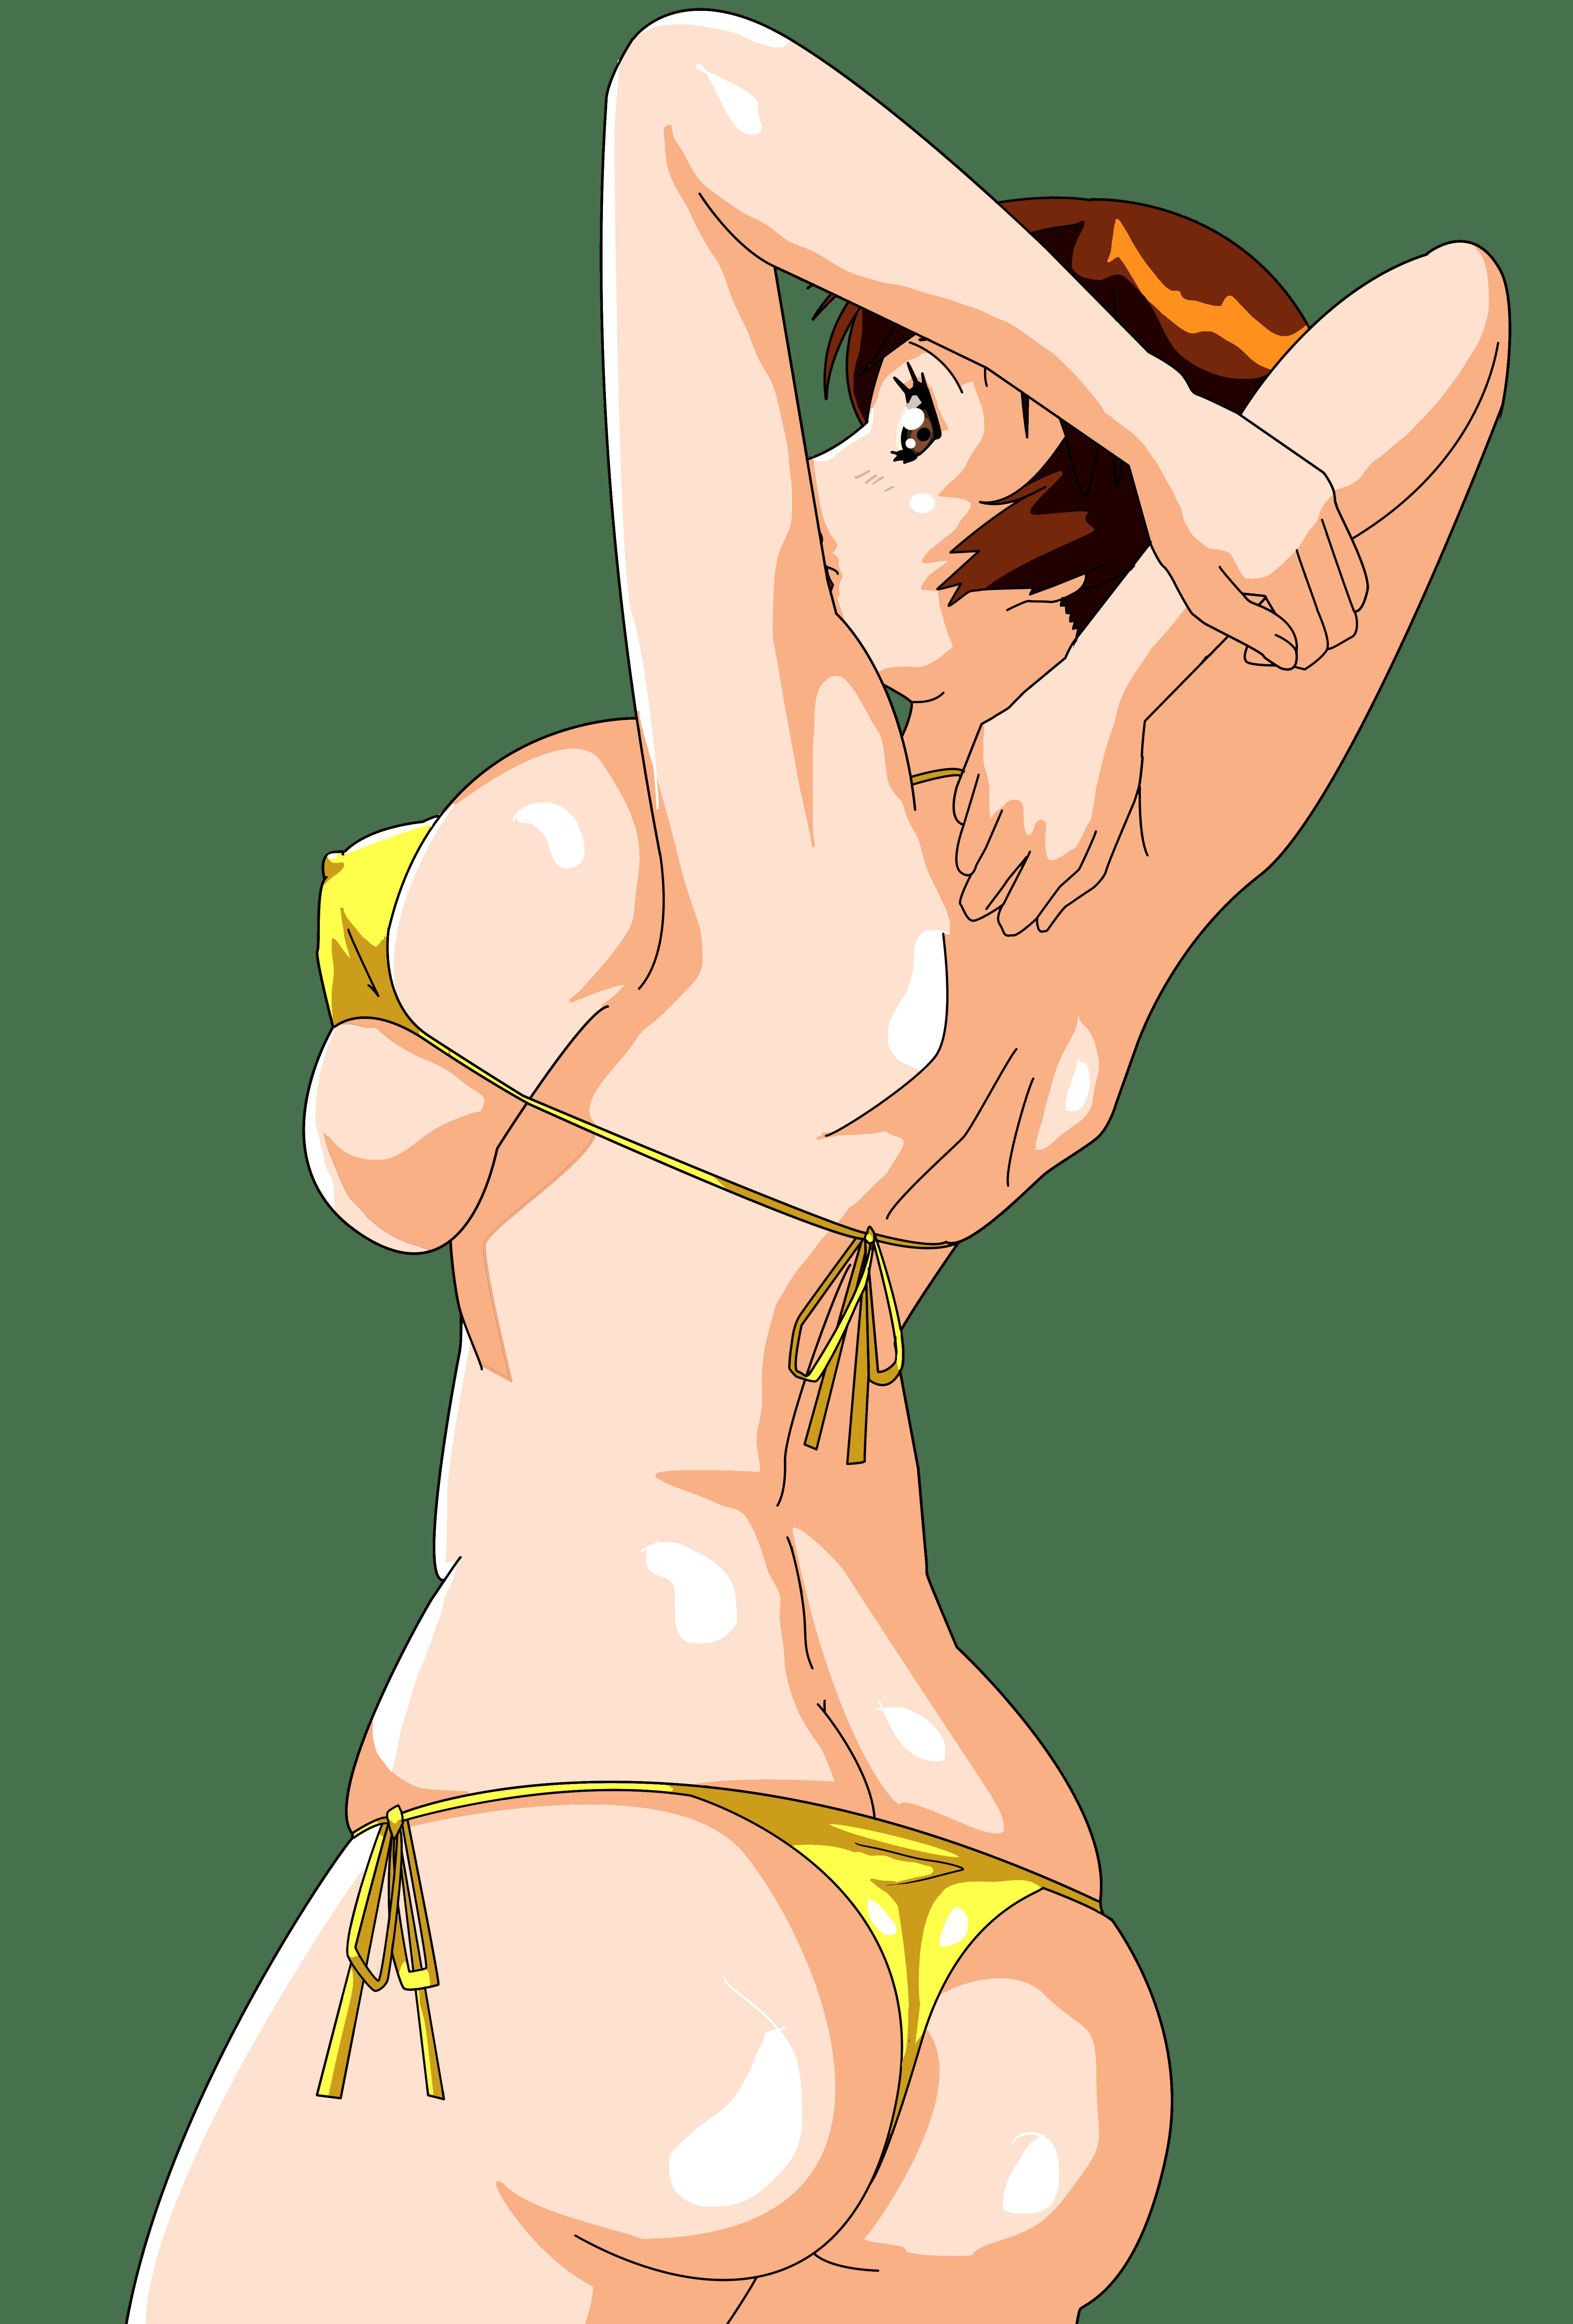 [Anime character material] png background of animated characters erotic images part 160 4